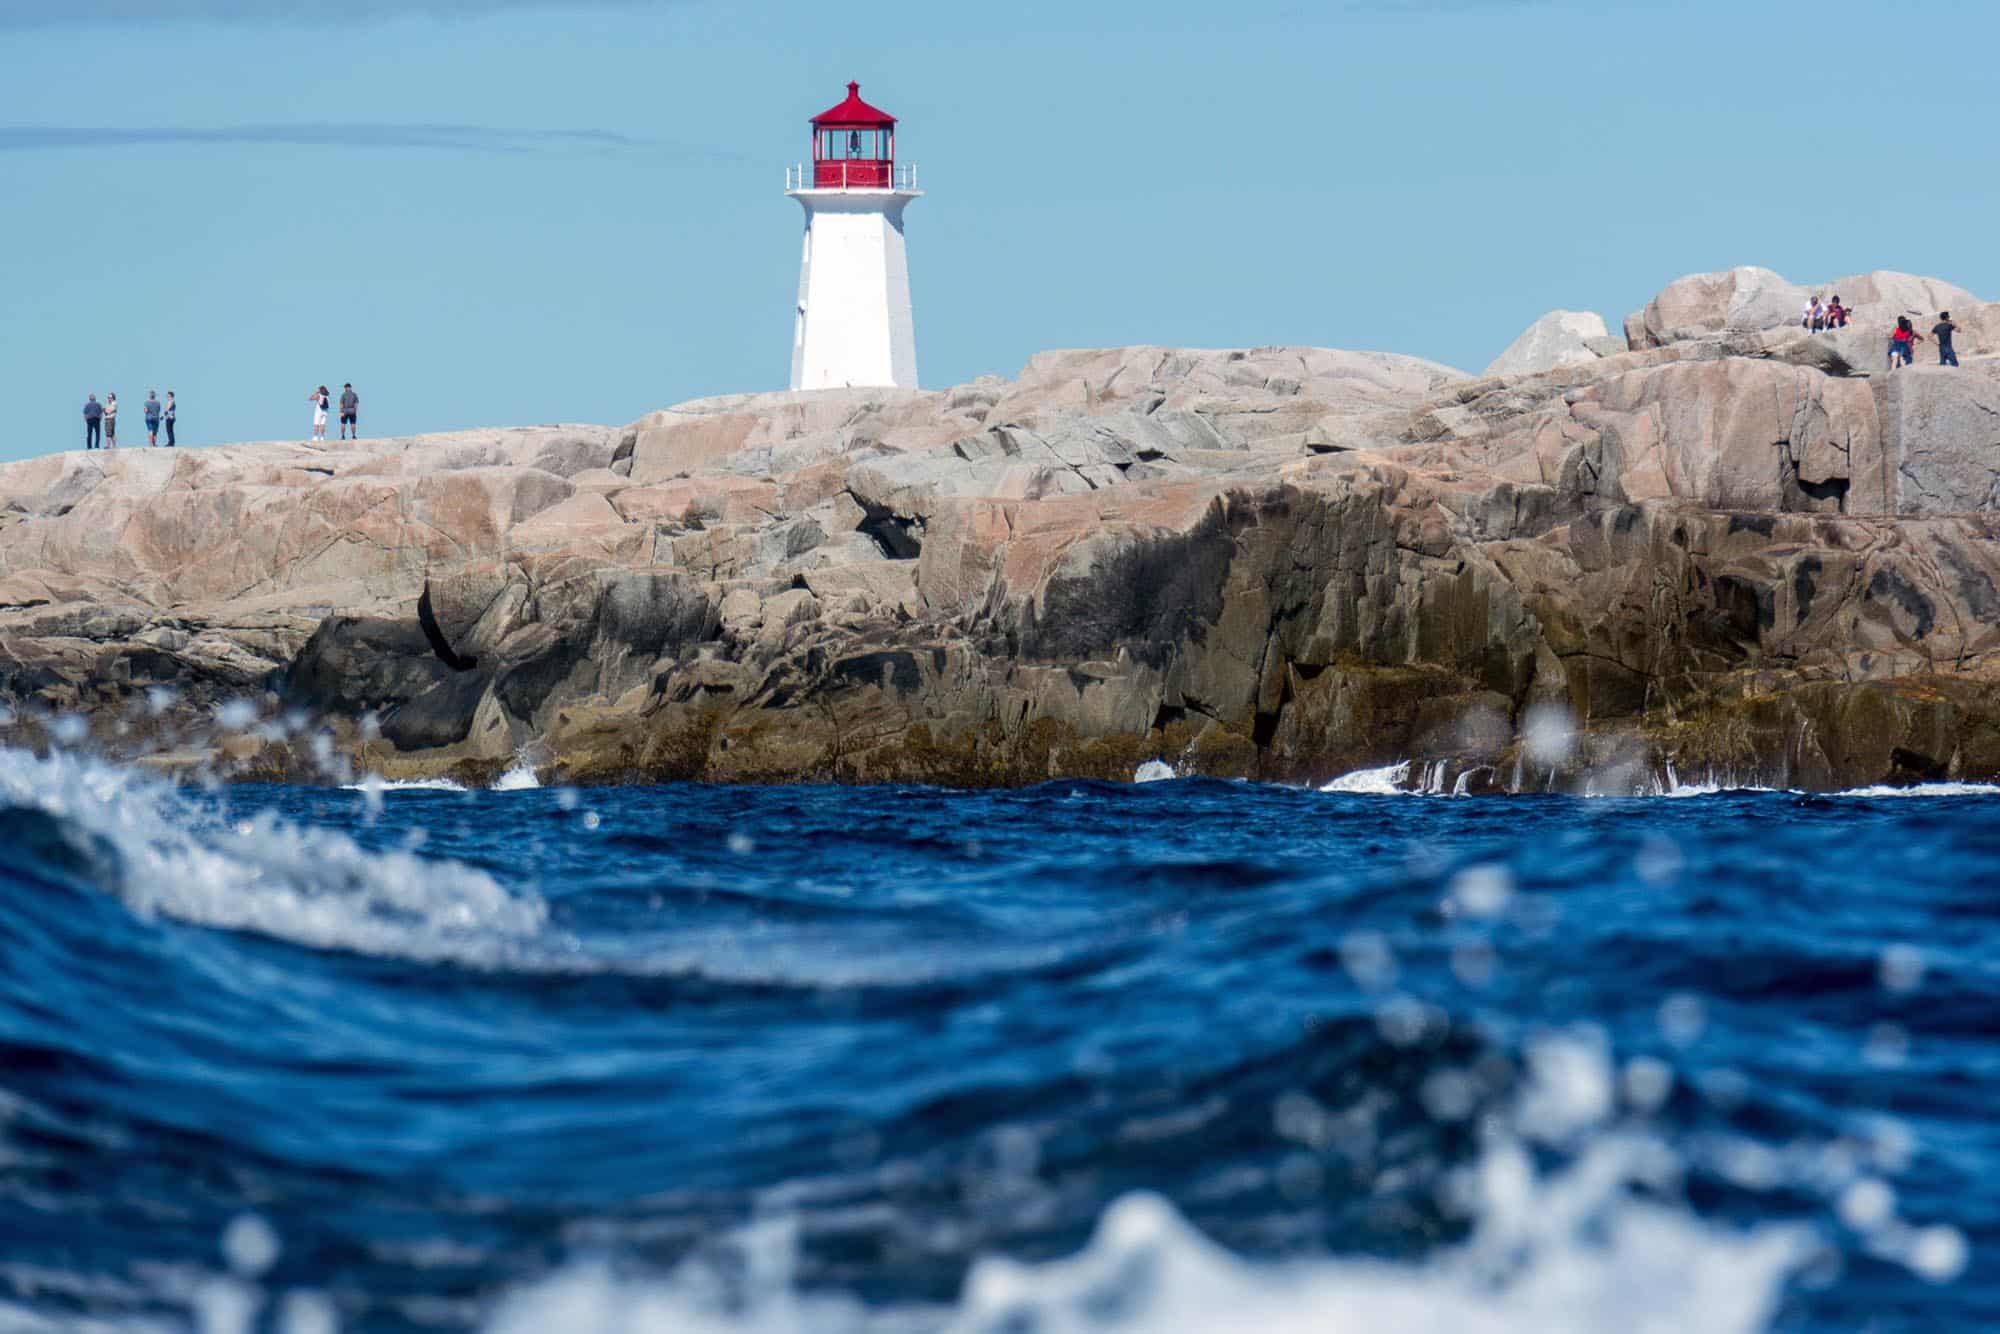 Ocean-level view of the lighthouse at Peggy's Cove, Nova Scotia - image by Picture Perfect Tours and Geordie Mott